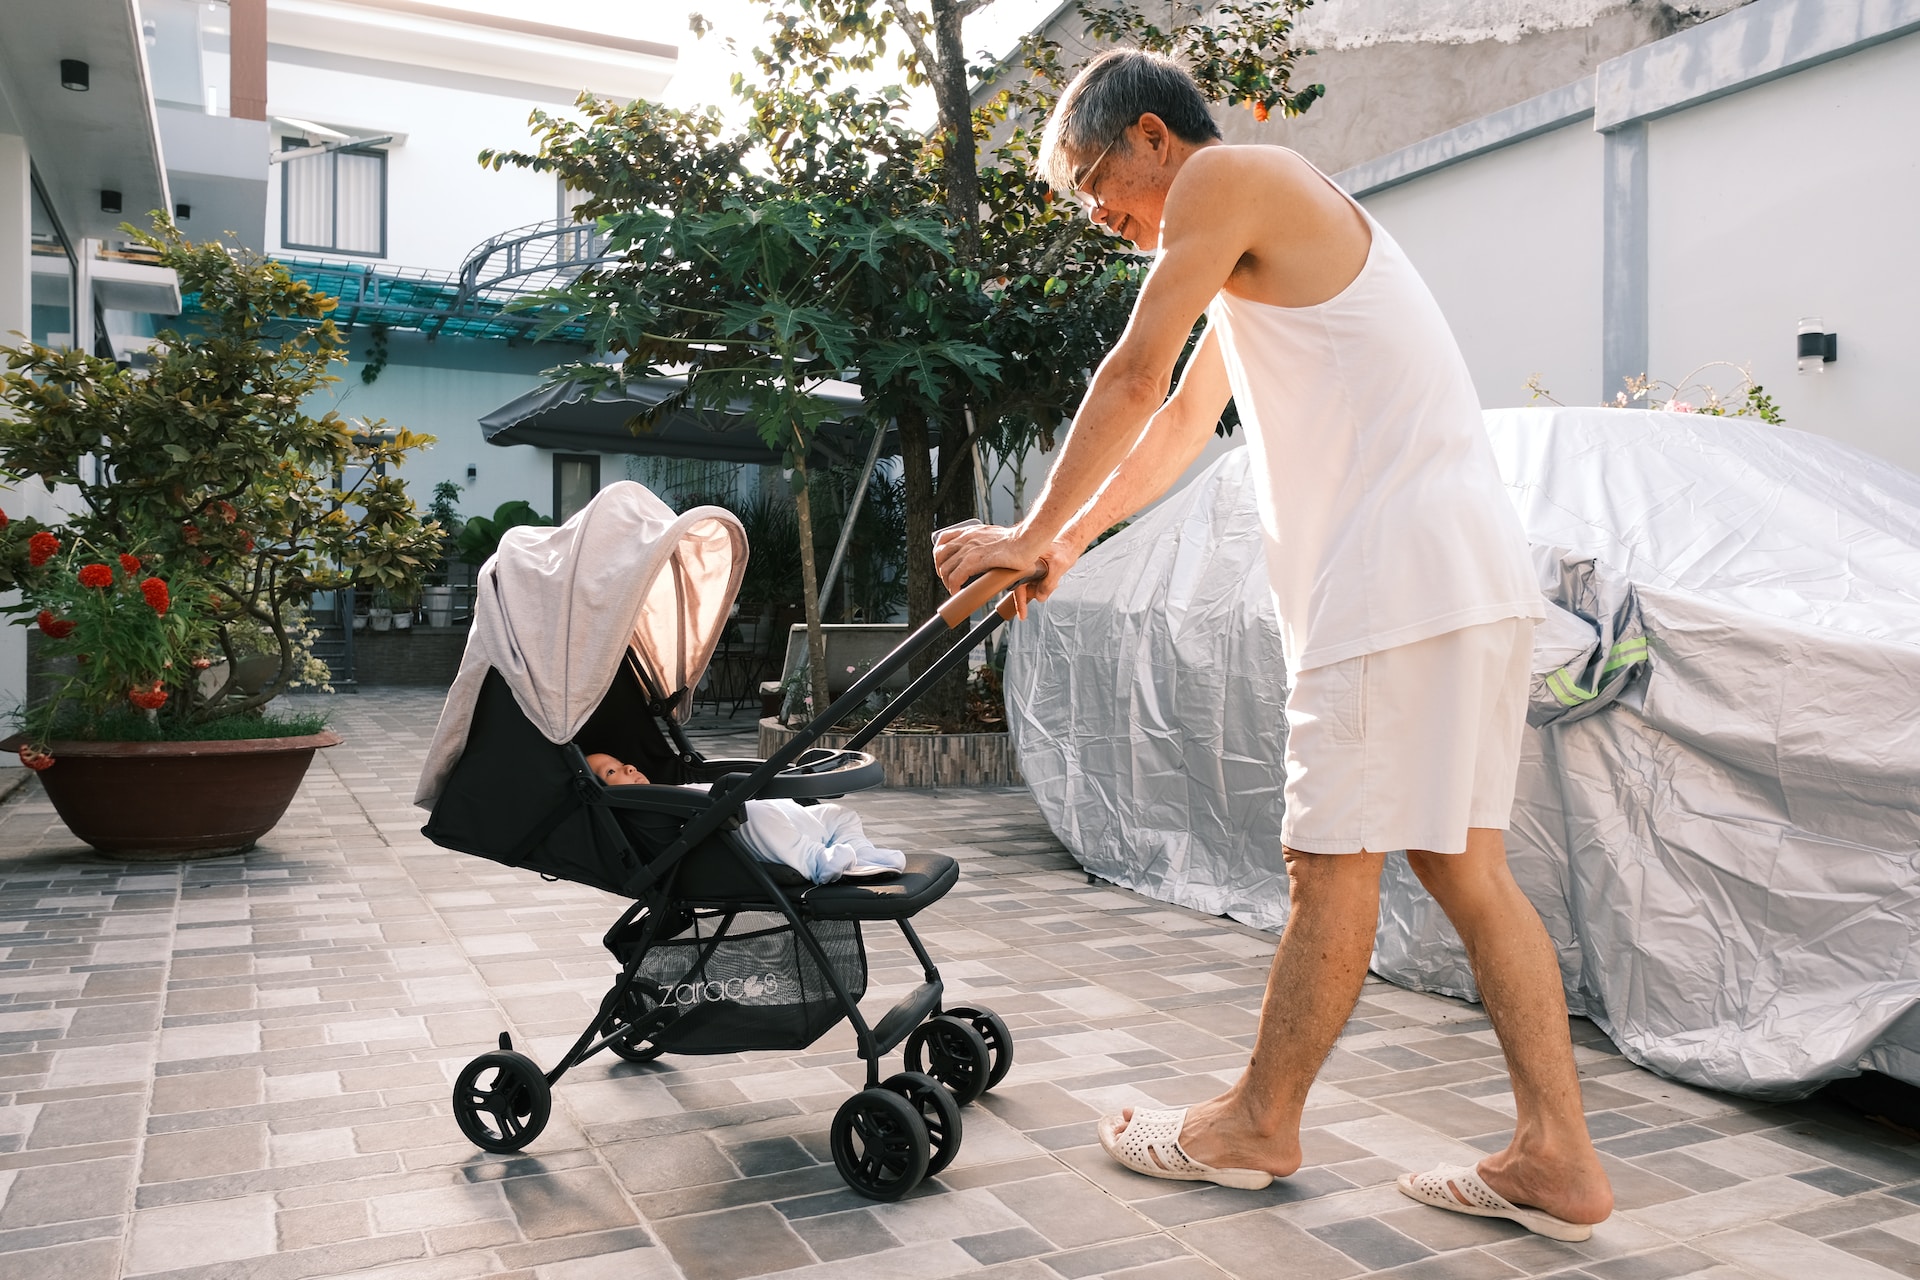 Covering an infant stroller in hot weather? Here’s what you need to know.